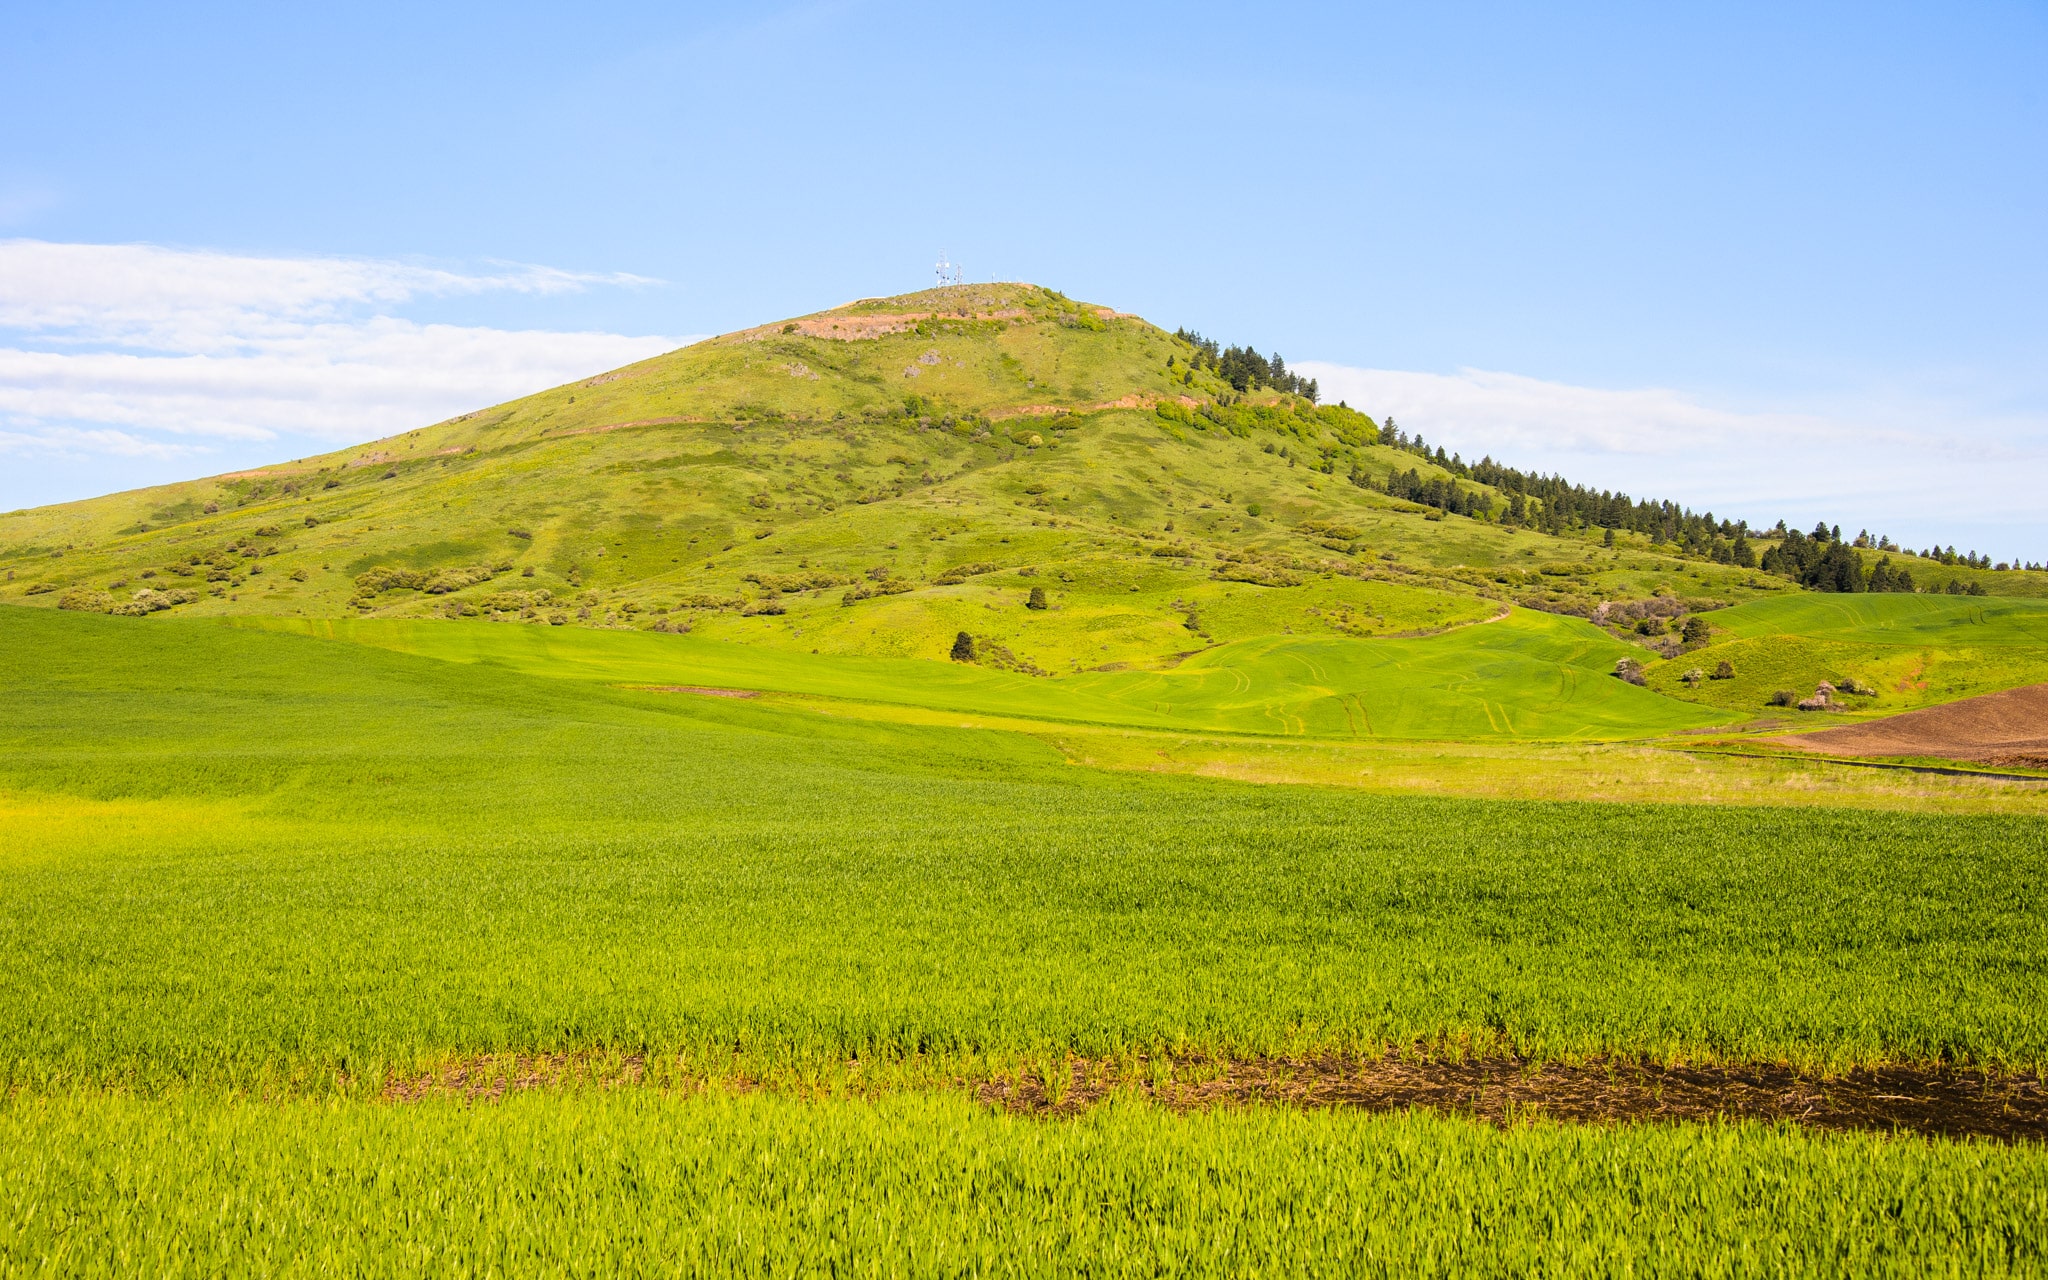 Steptoe Butte, in Steptoe Butte State Park, is a remnant of an earlier landscape that peeks through the rolling loess hills of the Palouse region of eastern Washington near Colfax.